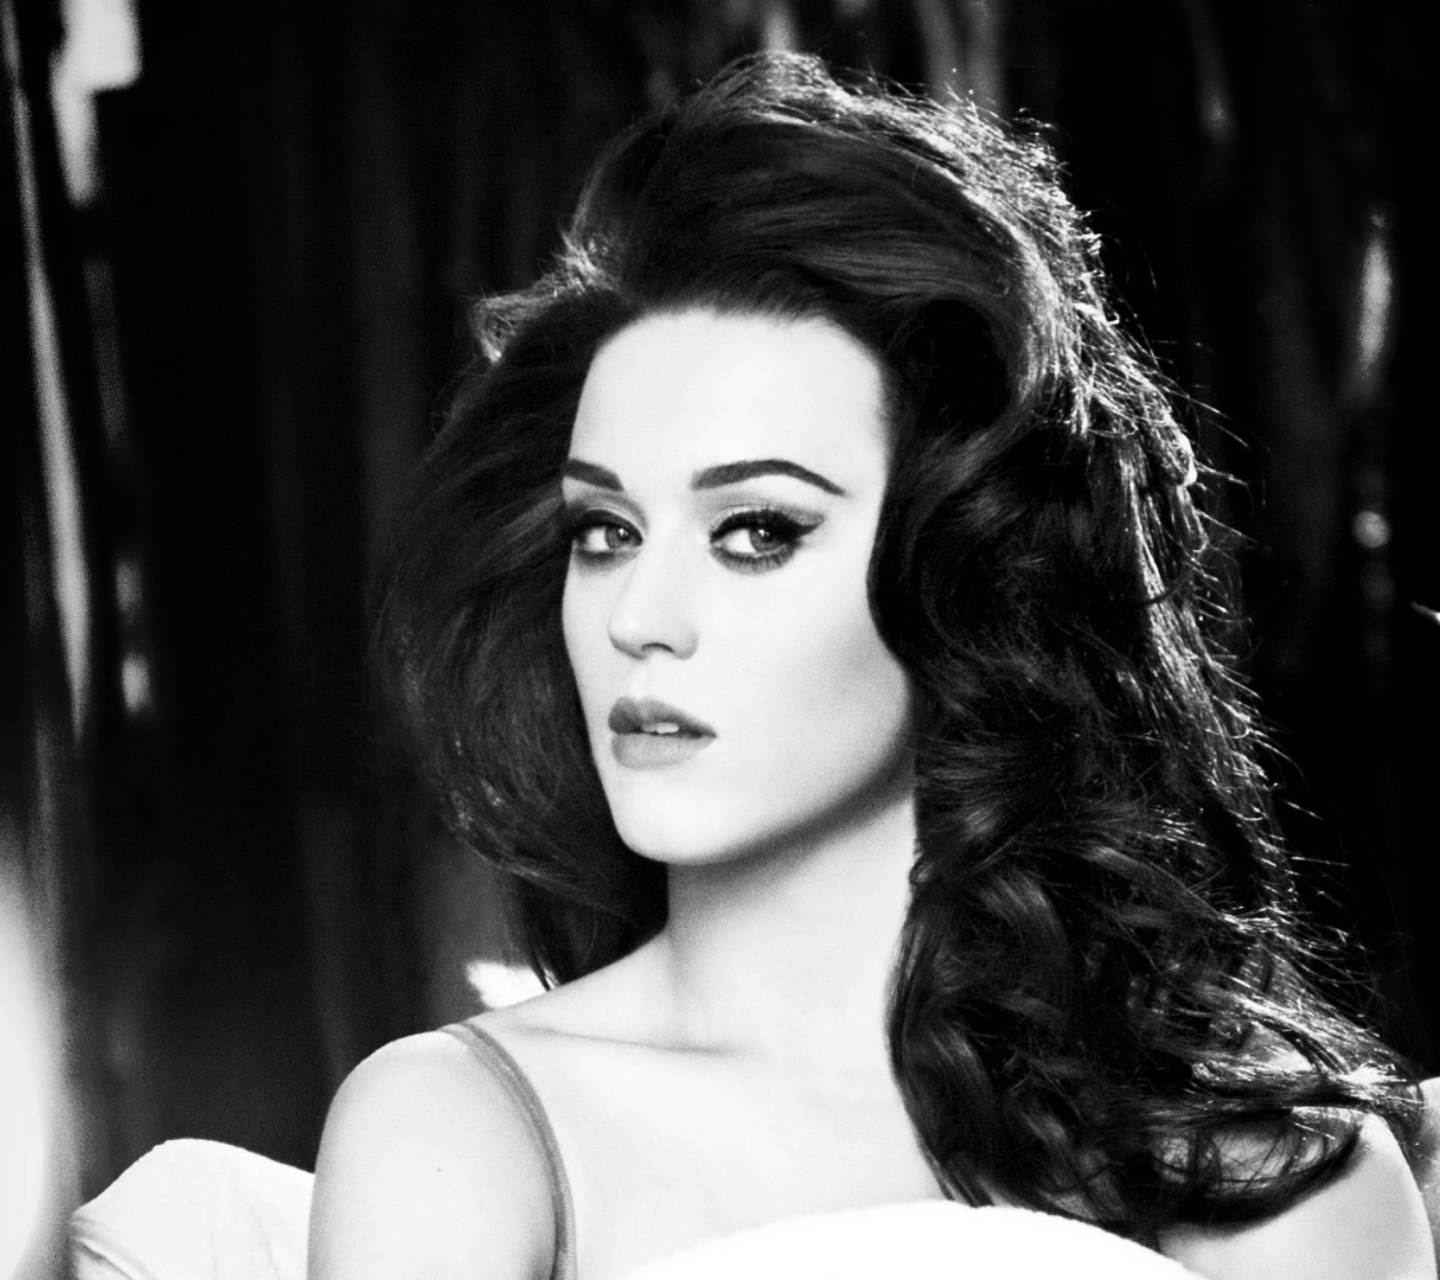 Katy Perry Black And White Wallpaper for Samsung Galaxy S3